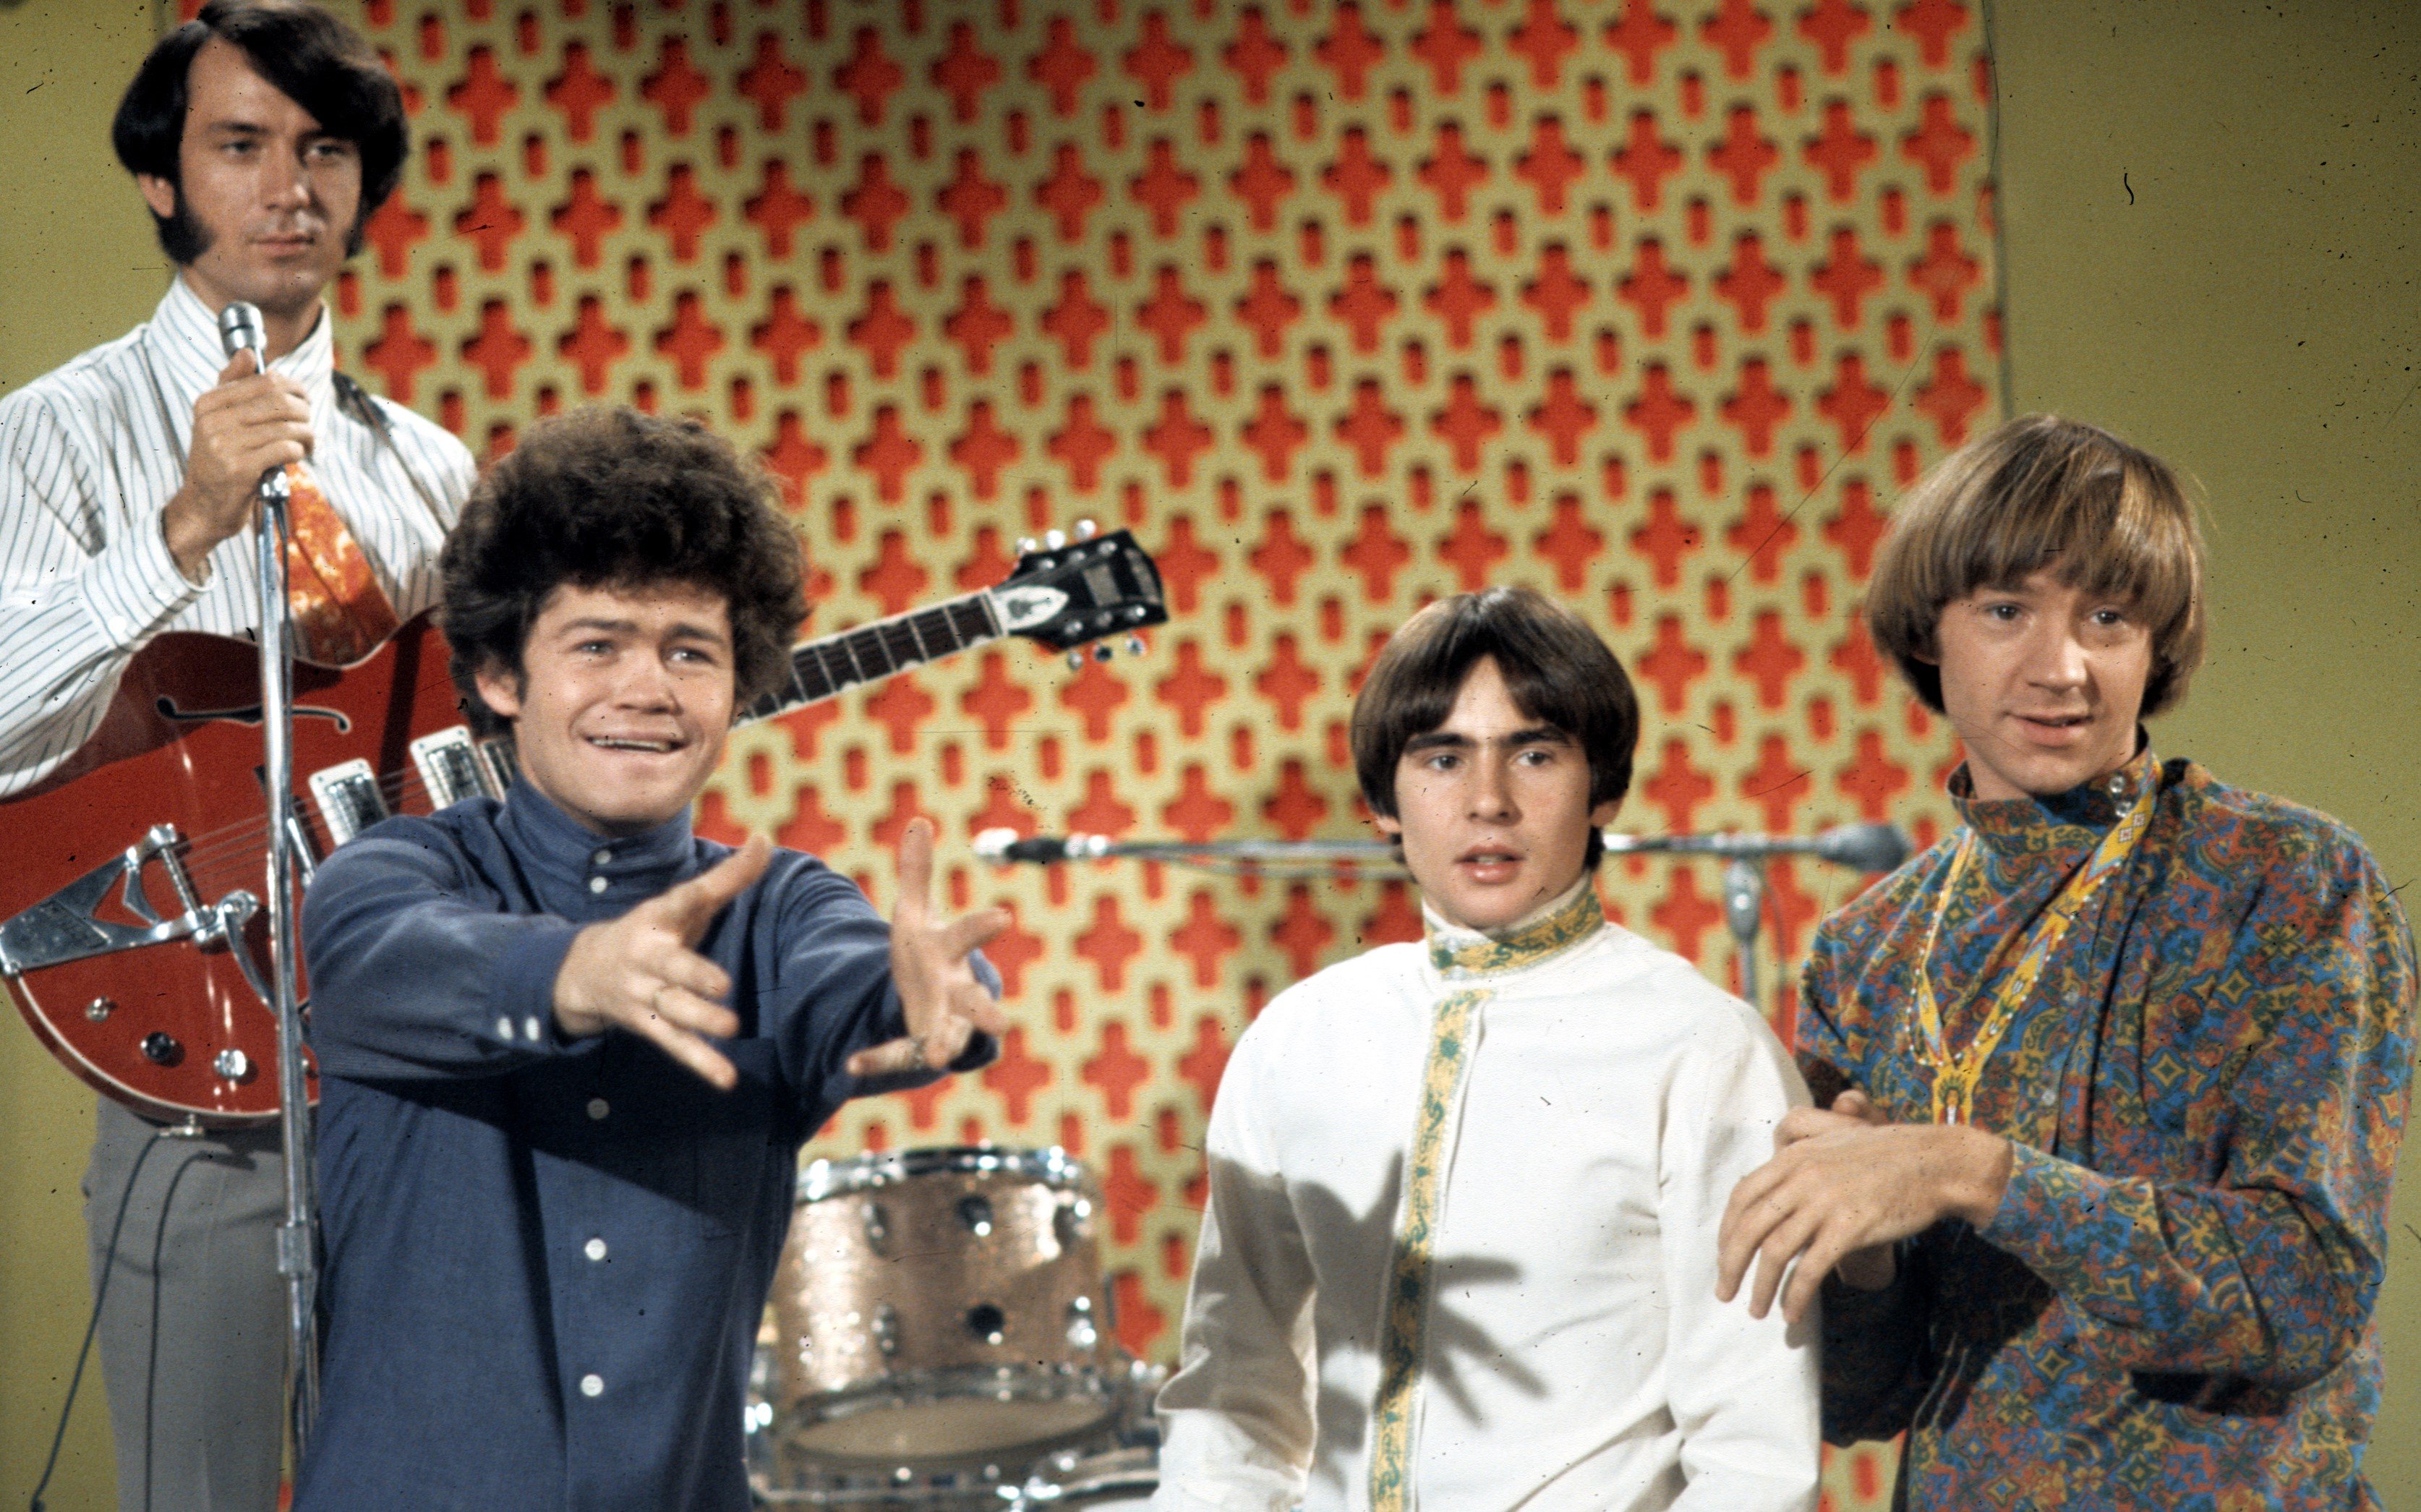 Mike Nesmith, Micky Dolenz, Davy Jones, and Peter Tork standing during The Monkees' "Words" era